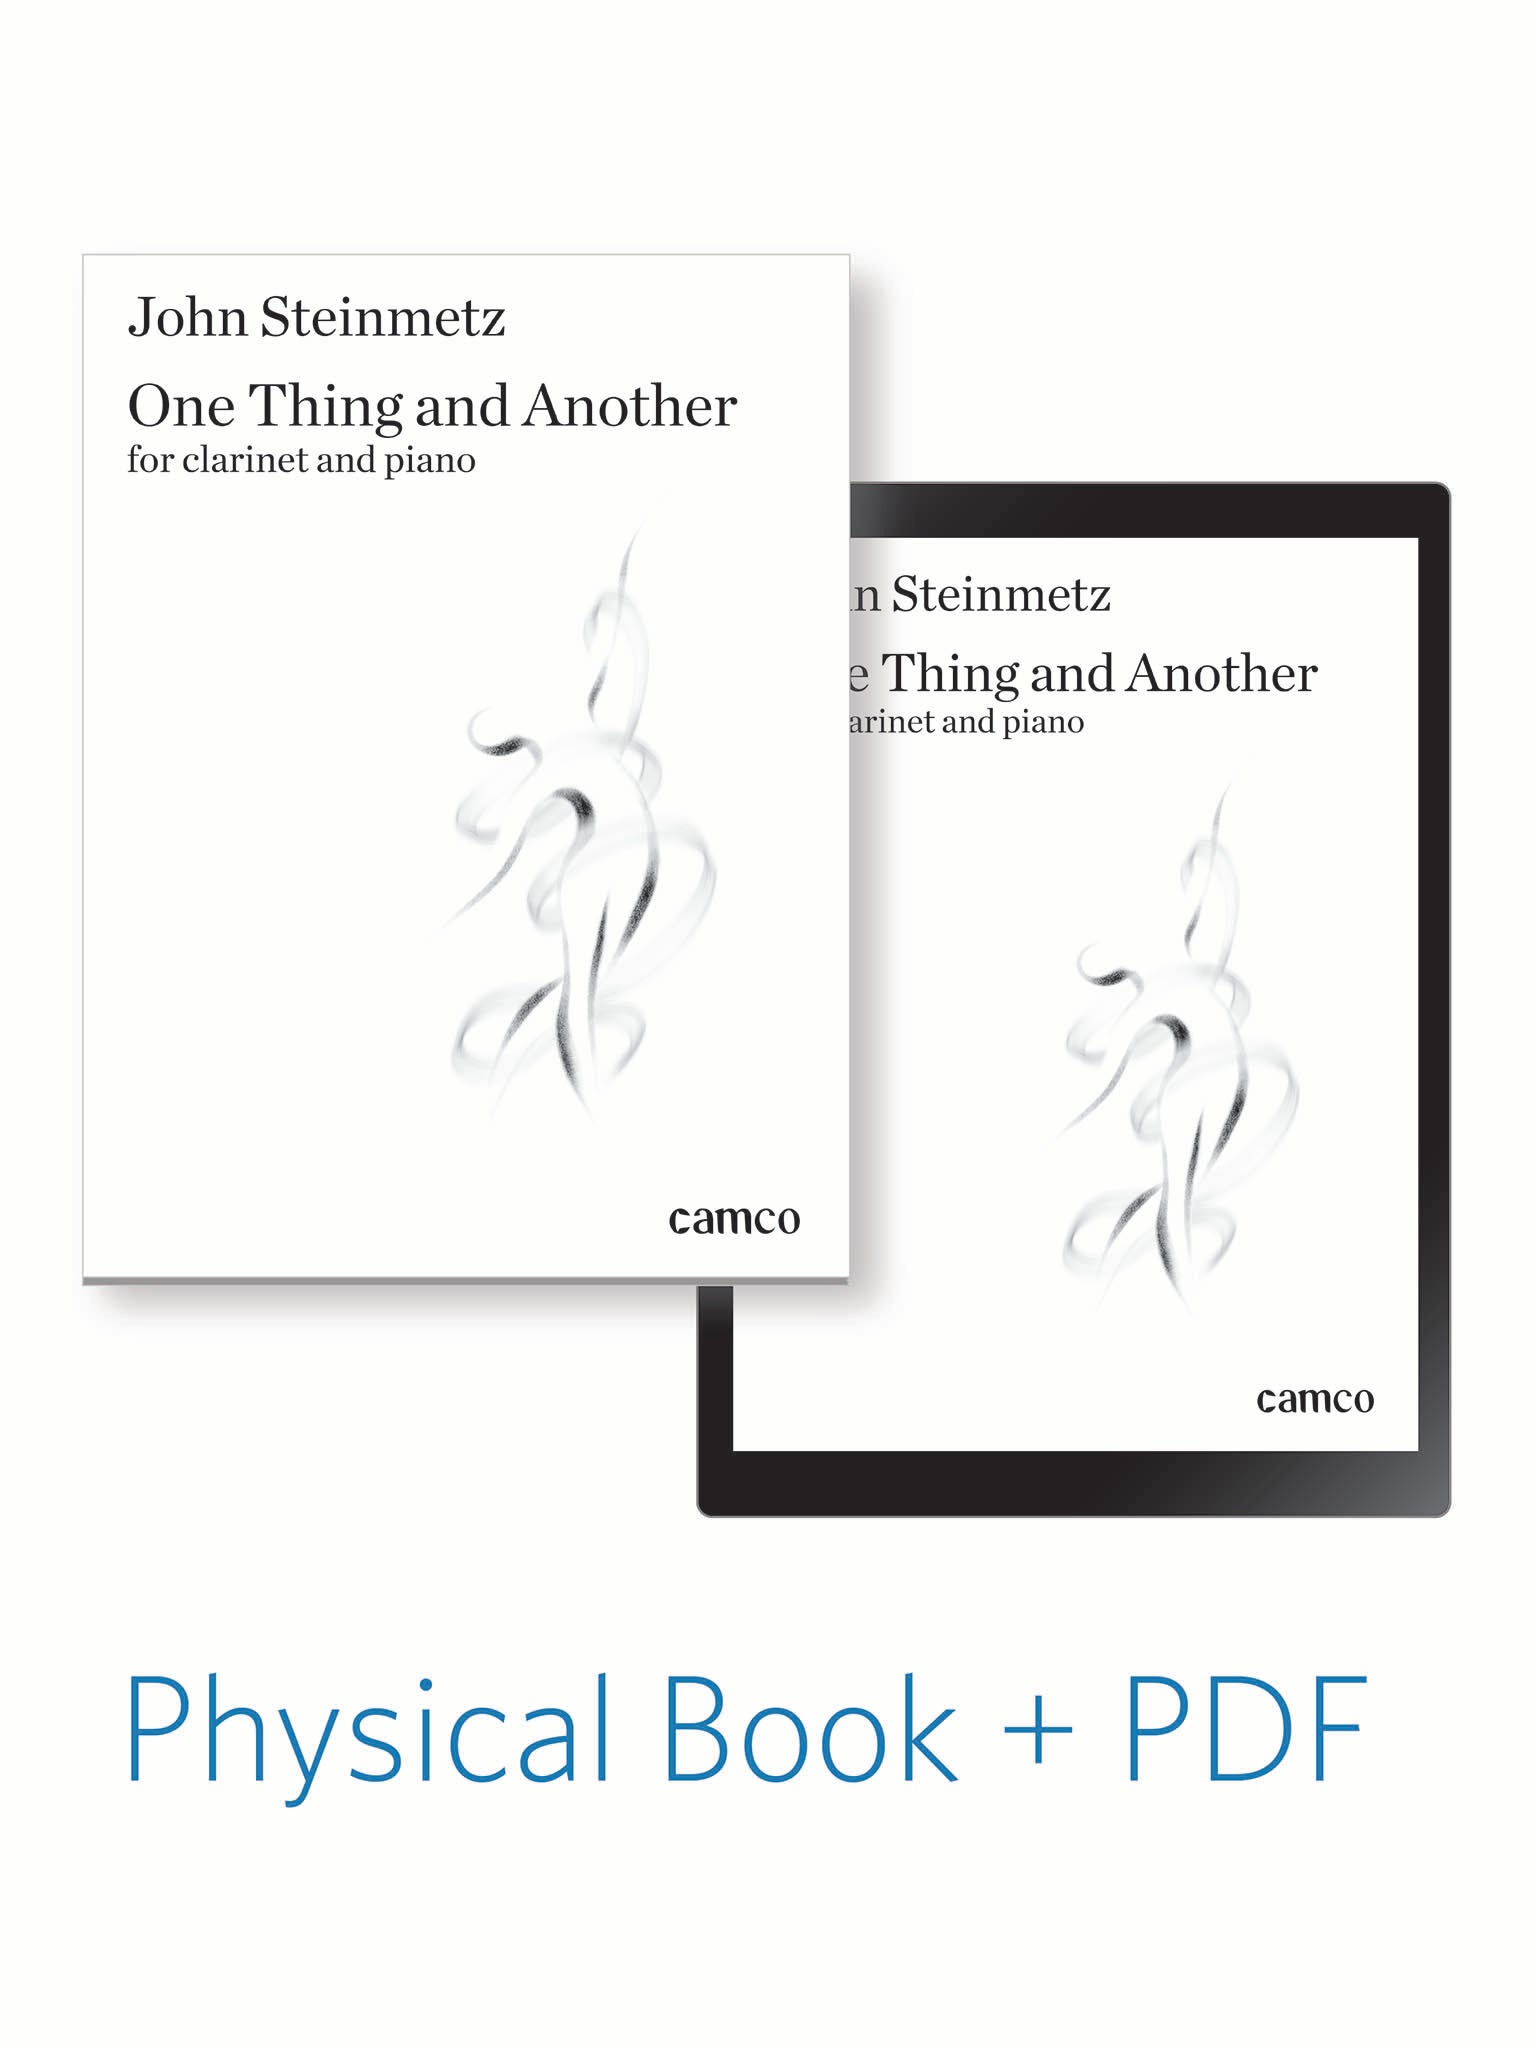 John Steinmetz One Thing and Another PDF and Physical Book bundle